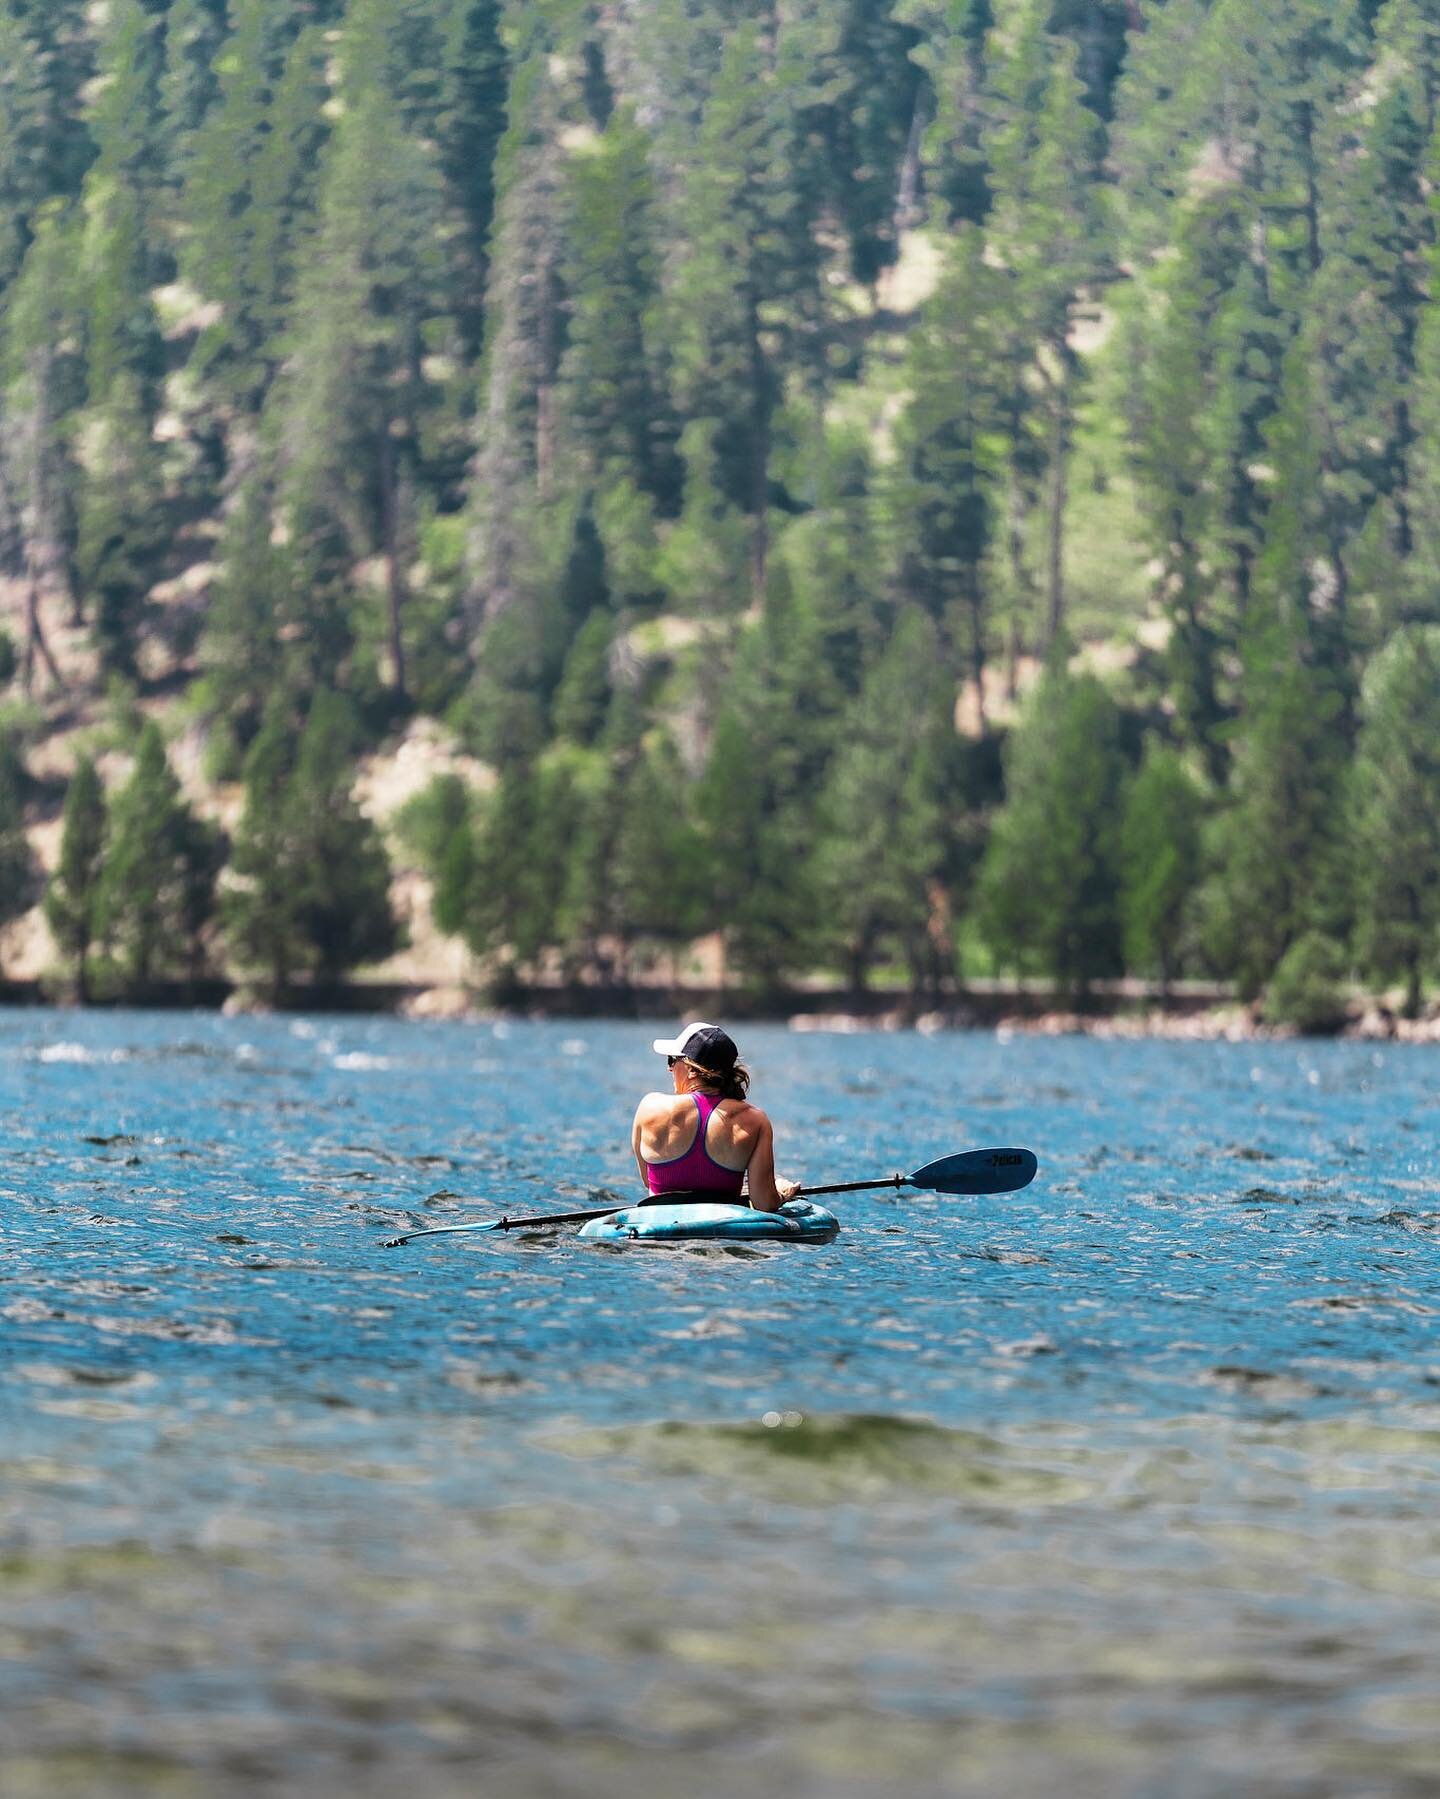 Adventure Monday! 

Who&rsquo;s ready to kayak? 🙋&zwj;♀️Did you know that we have complimentary kayaks for you to use when you stay with us? ☀️
&bull;
&bull;
#scandiainn #visitmccall #mccallidaho #mccall #visitidaho #adventuremonday #lakevibes #idah